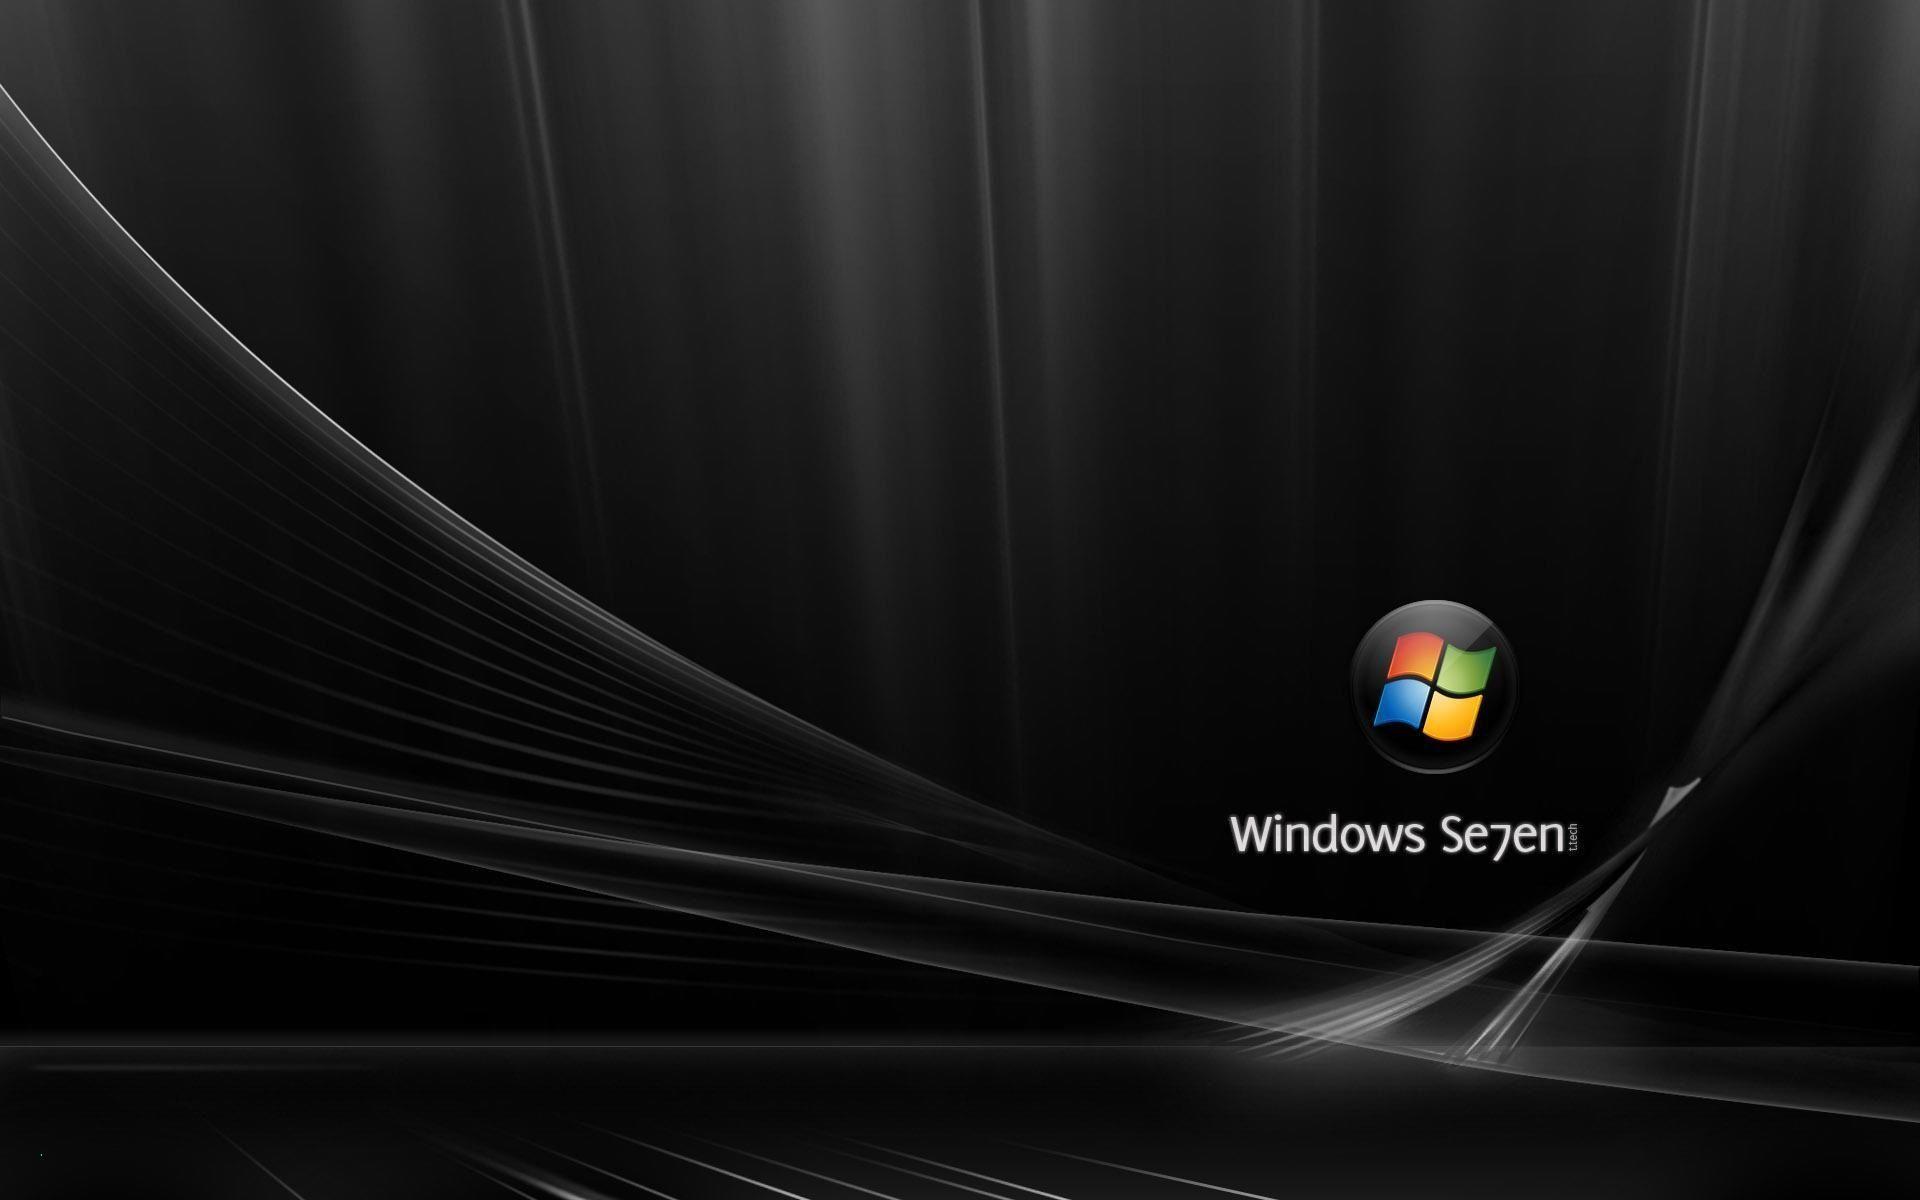 Lovely Windows 7 Wallpaper Black and White. LOVE WALLPAPER PAGES